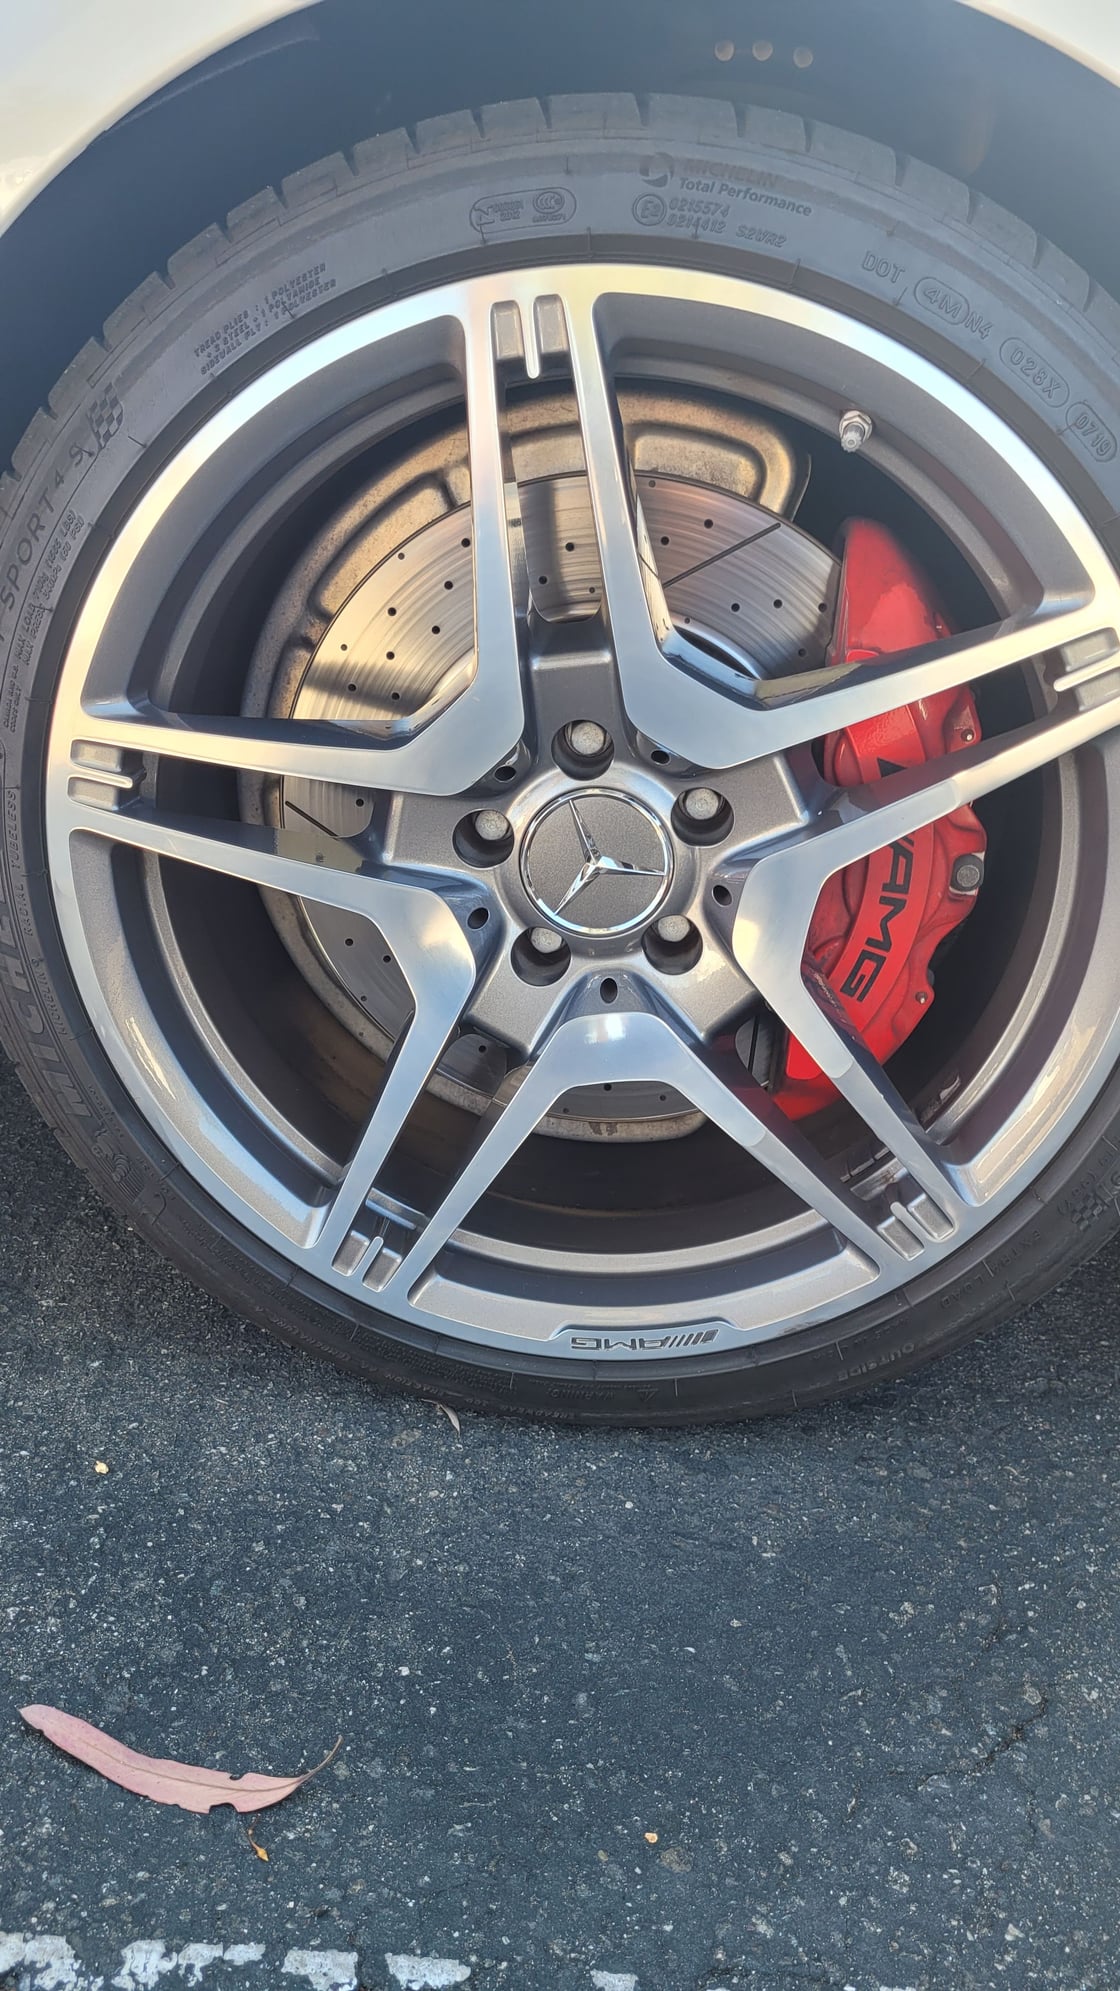 Wheels and Tires/Axles - OEM CLS63 Wheels/Tires - Used - 2014 Mercedes-Benz CLS63 AMG S - Costa Mesa, CA 92627, United States